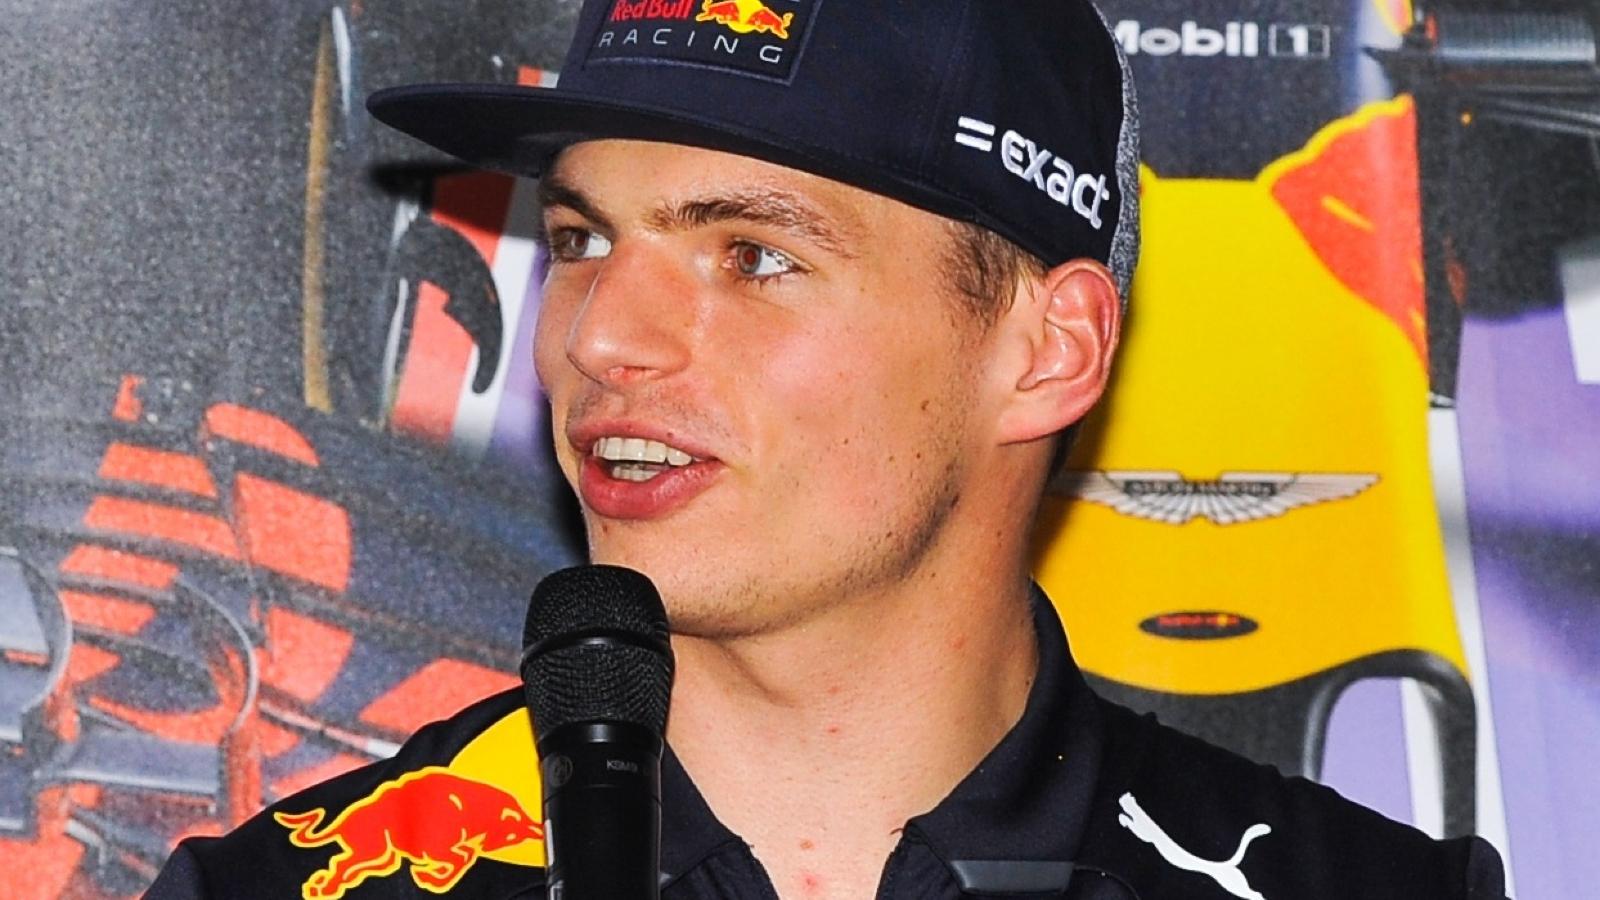 Verstappen is contracted to Red Bull until 2028